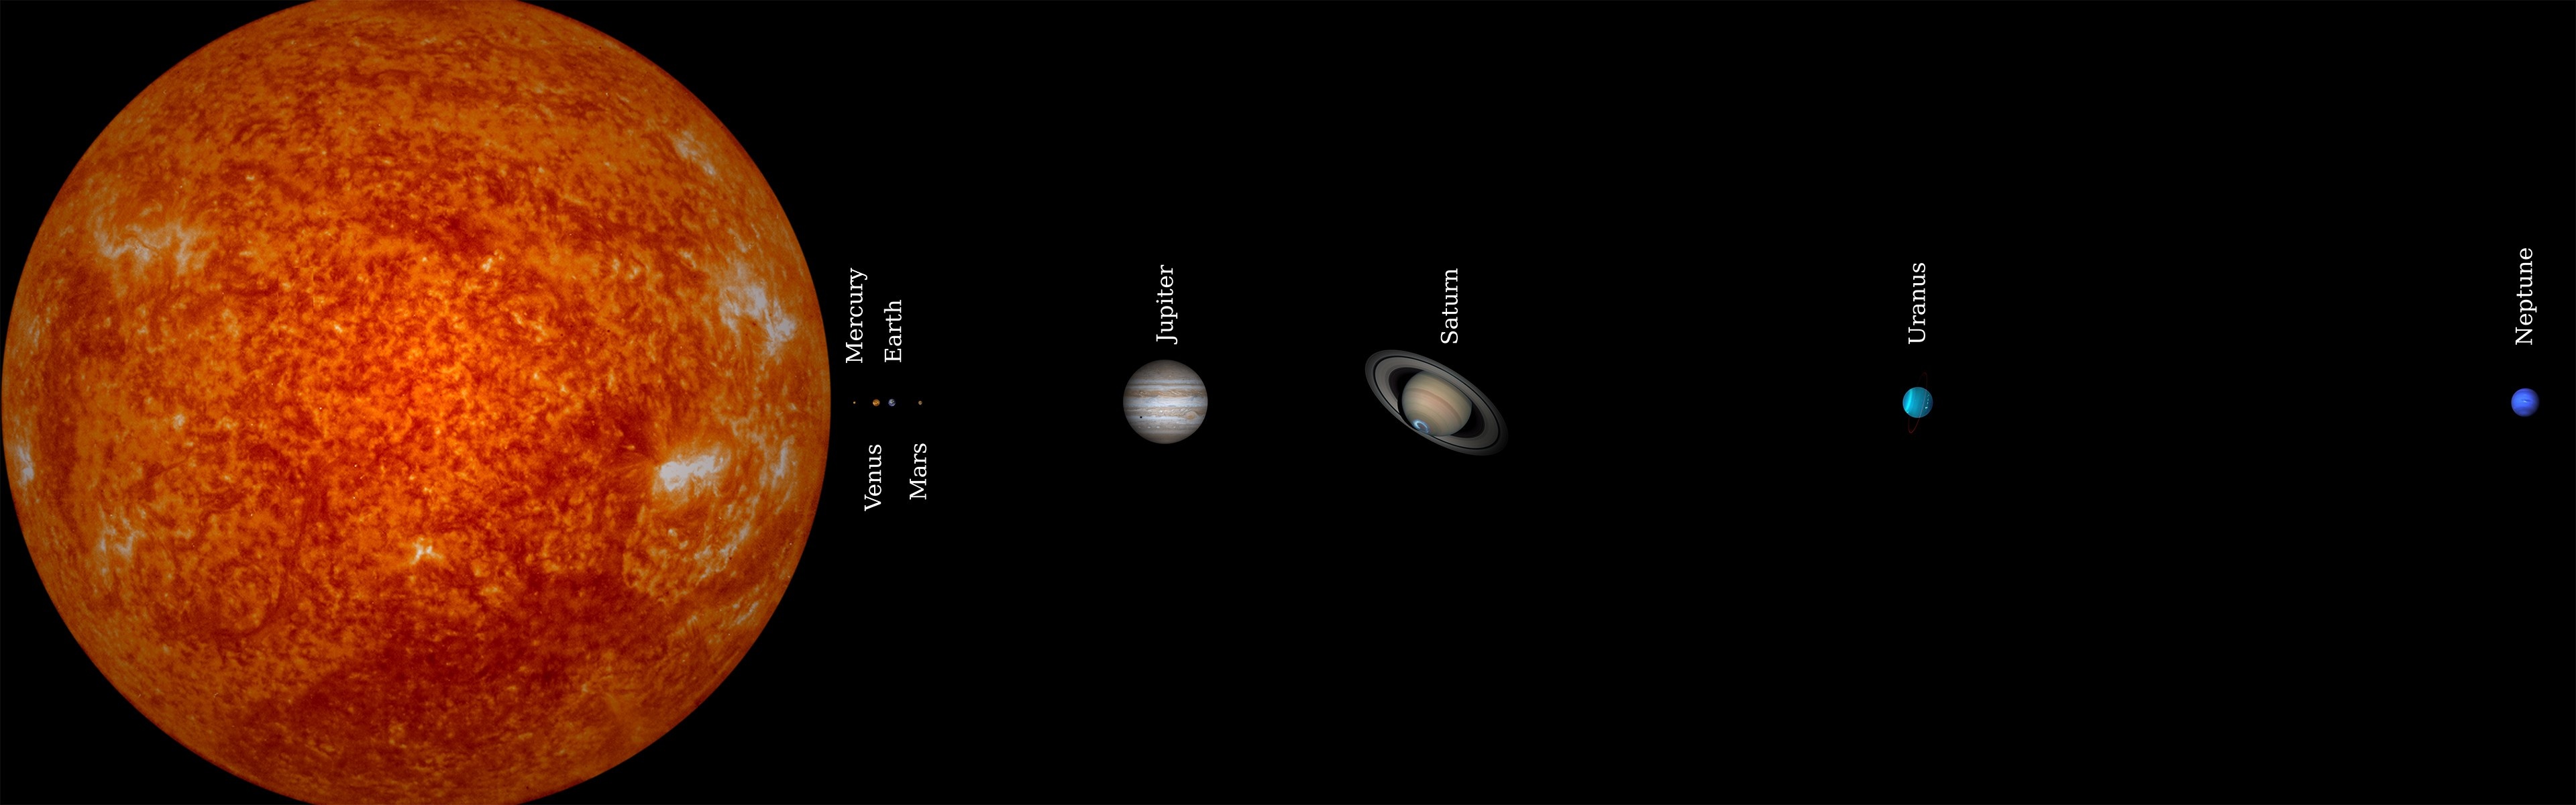 9 Planets, Simple background, Solar system, 3840x1200 Dual Screen Desktop